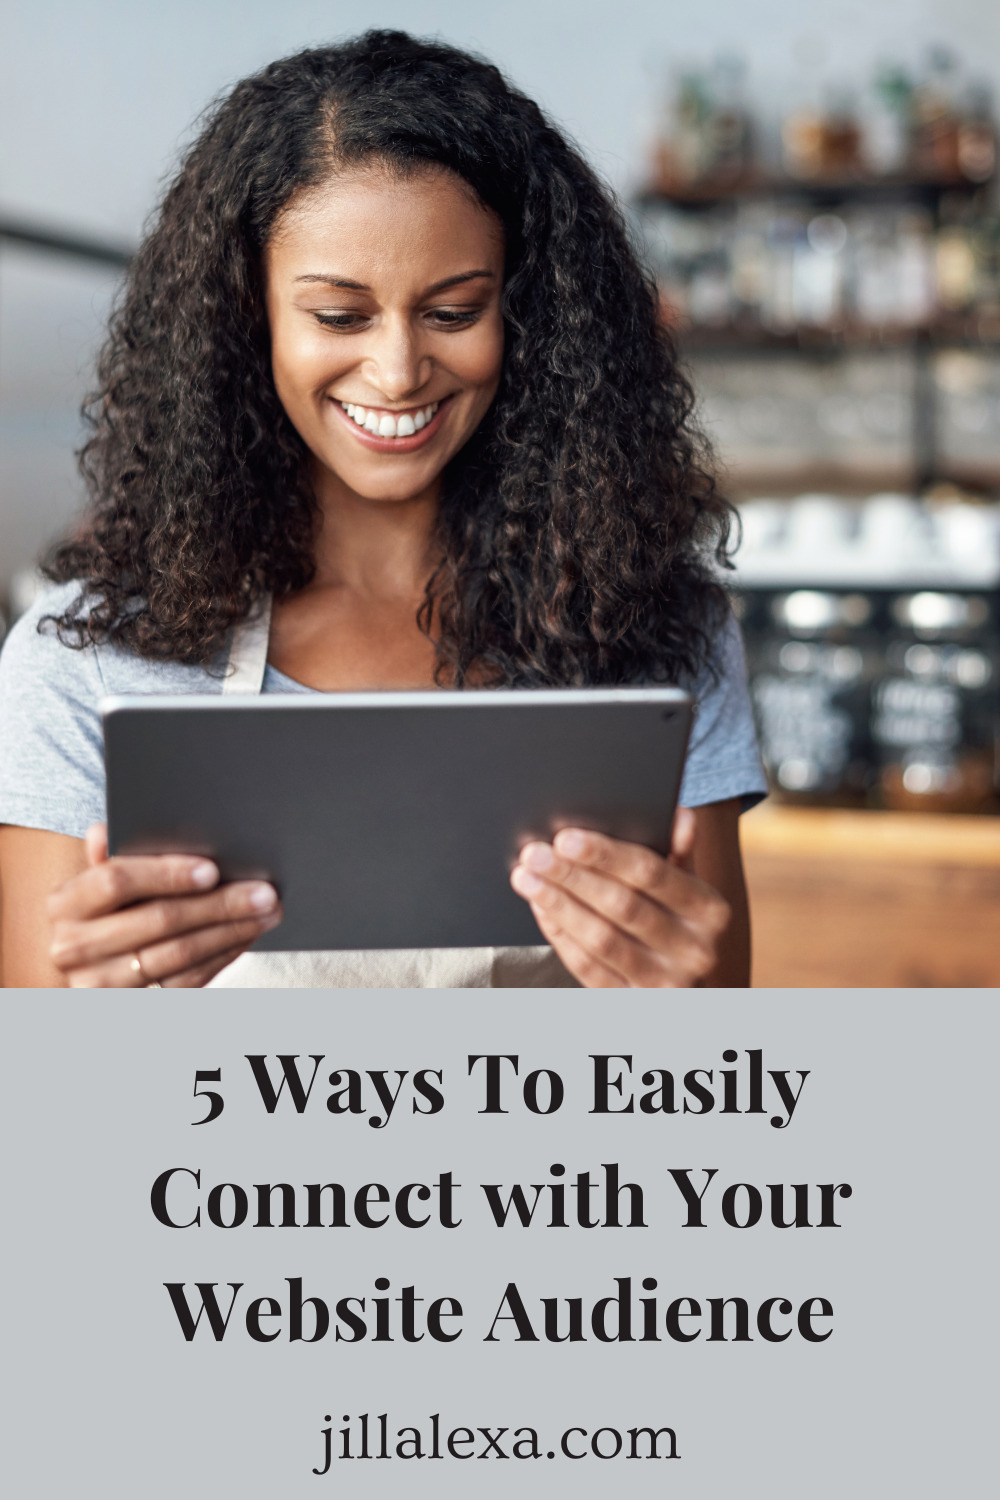 Whether its for business or a hobby, connecting with your website audience is crucial. Here are 5 ways to easily connect with your website audience this year.